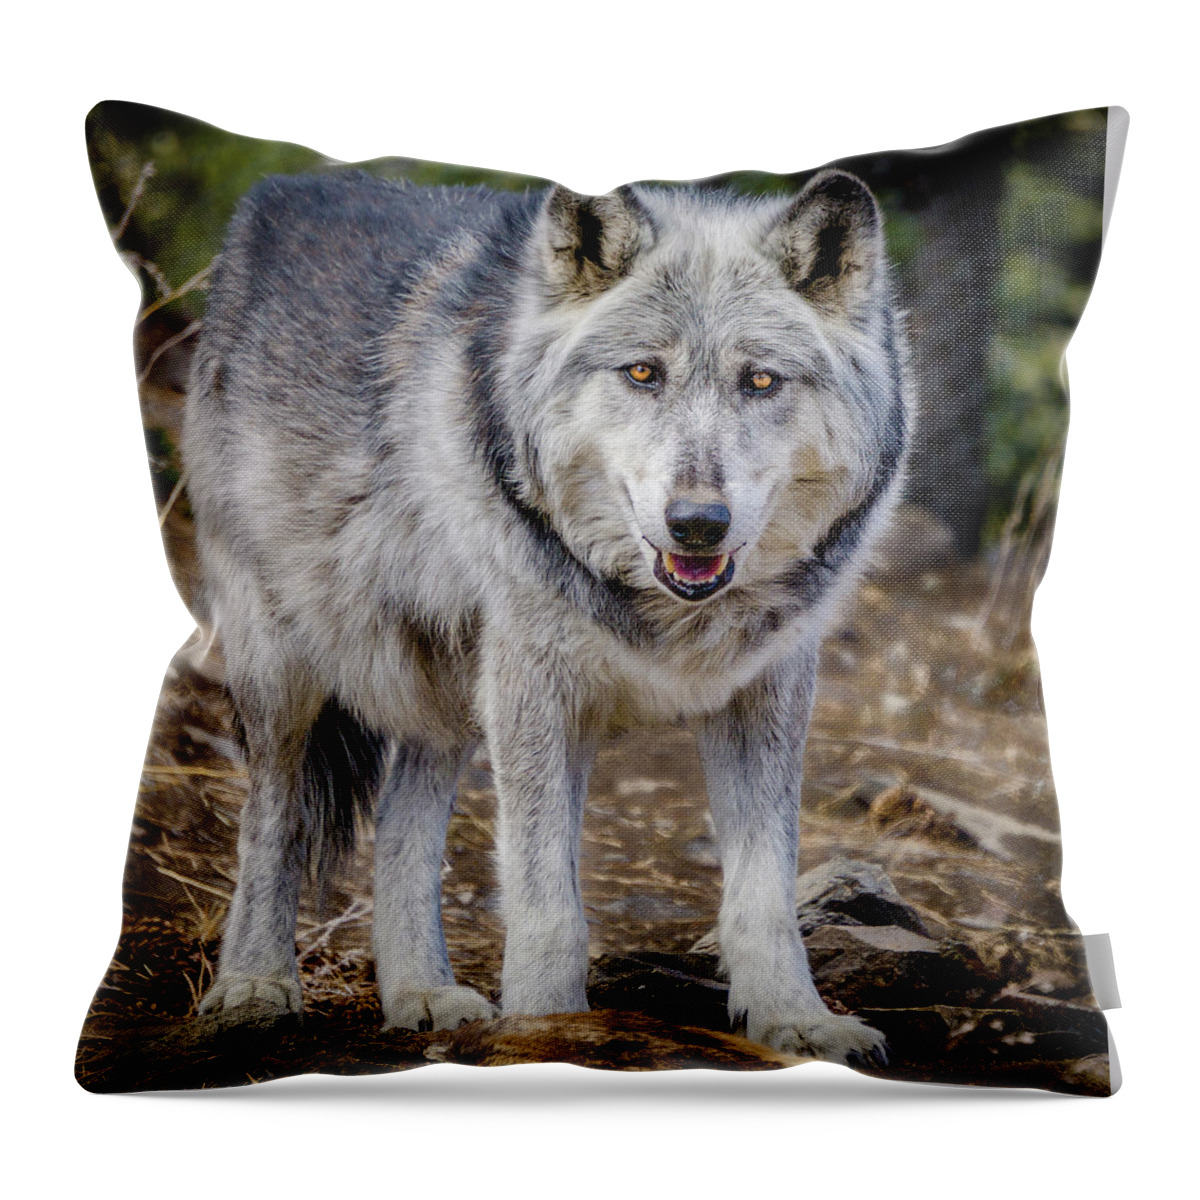 Animal Throw Pillow featuring the photograph The Great Gray Wolf by Teri Virbickis